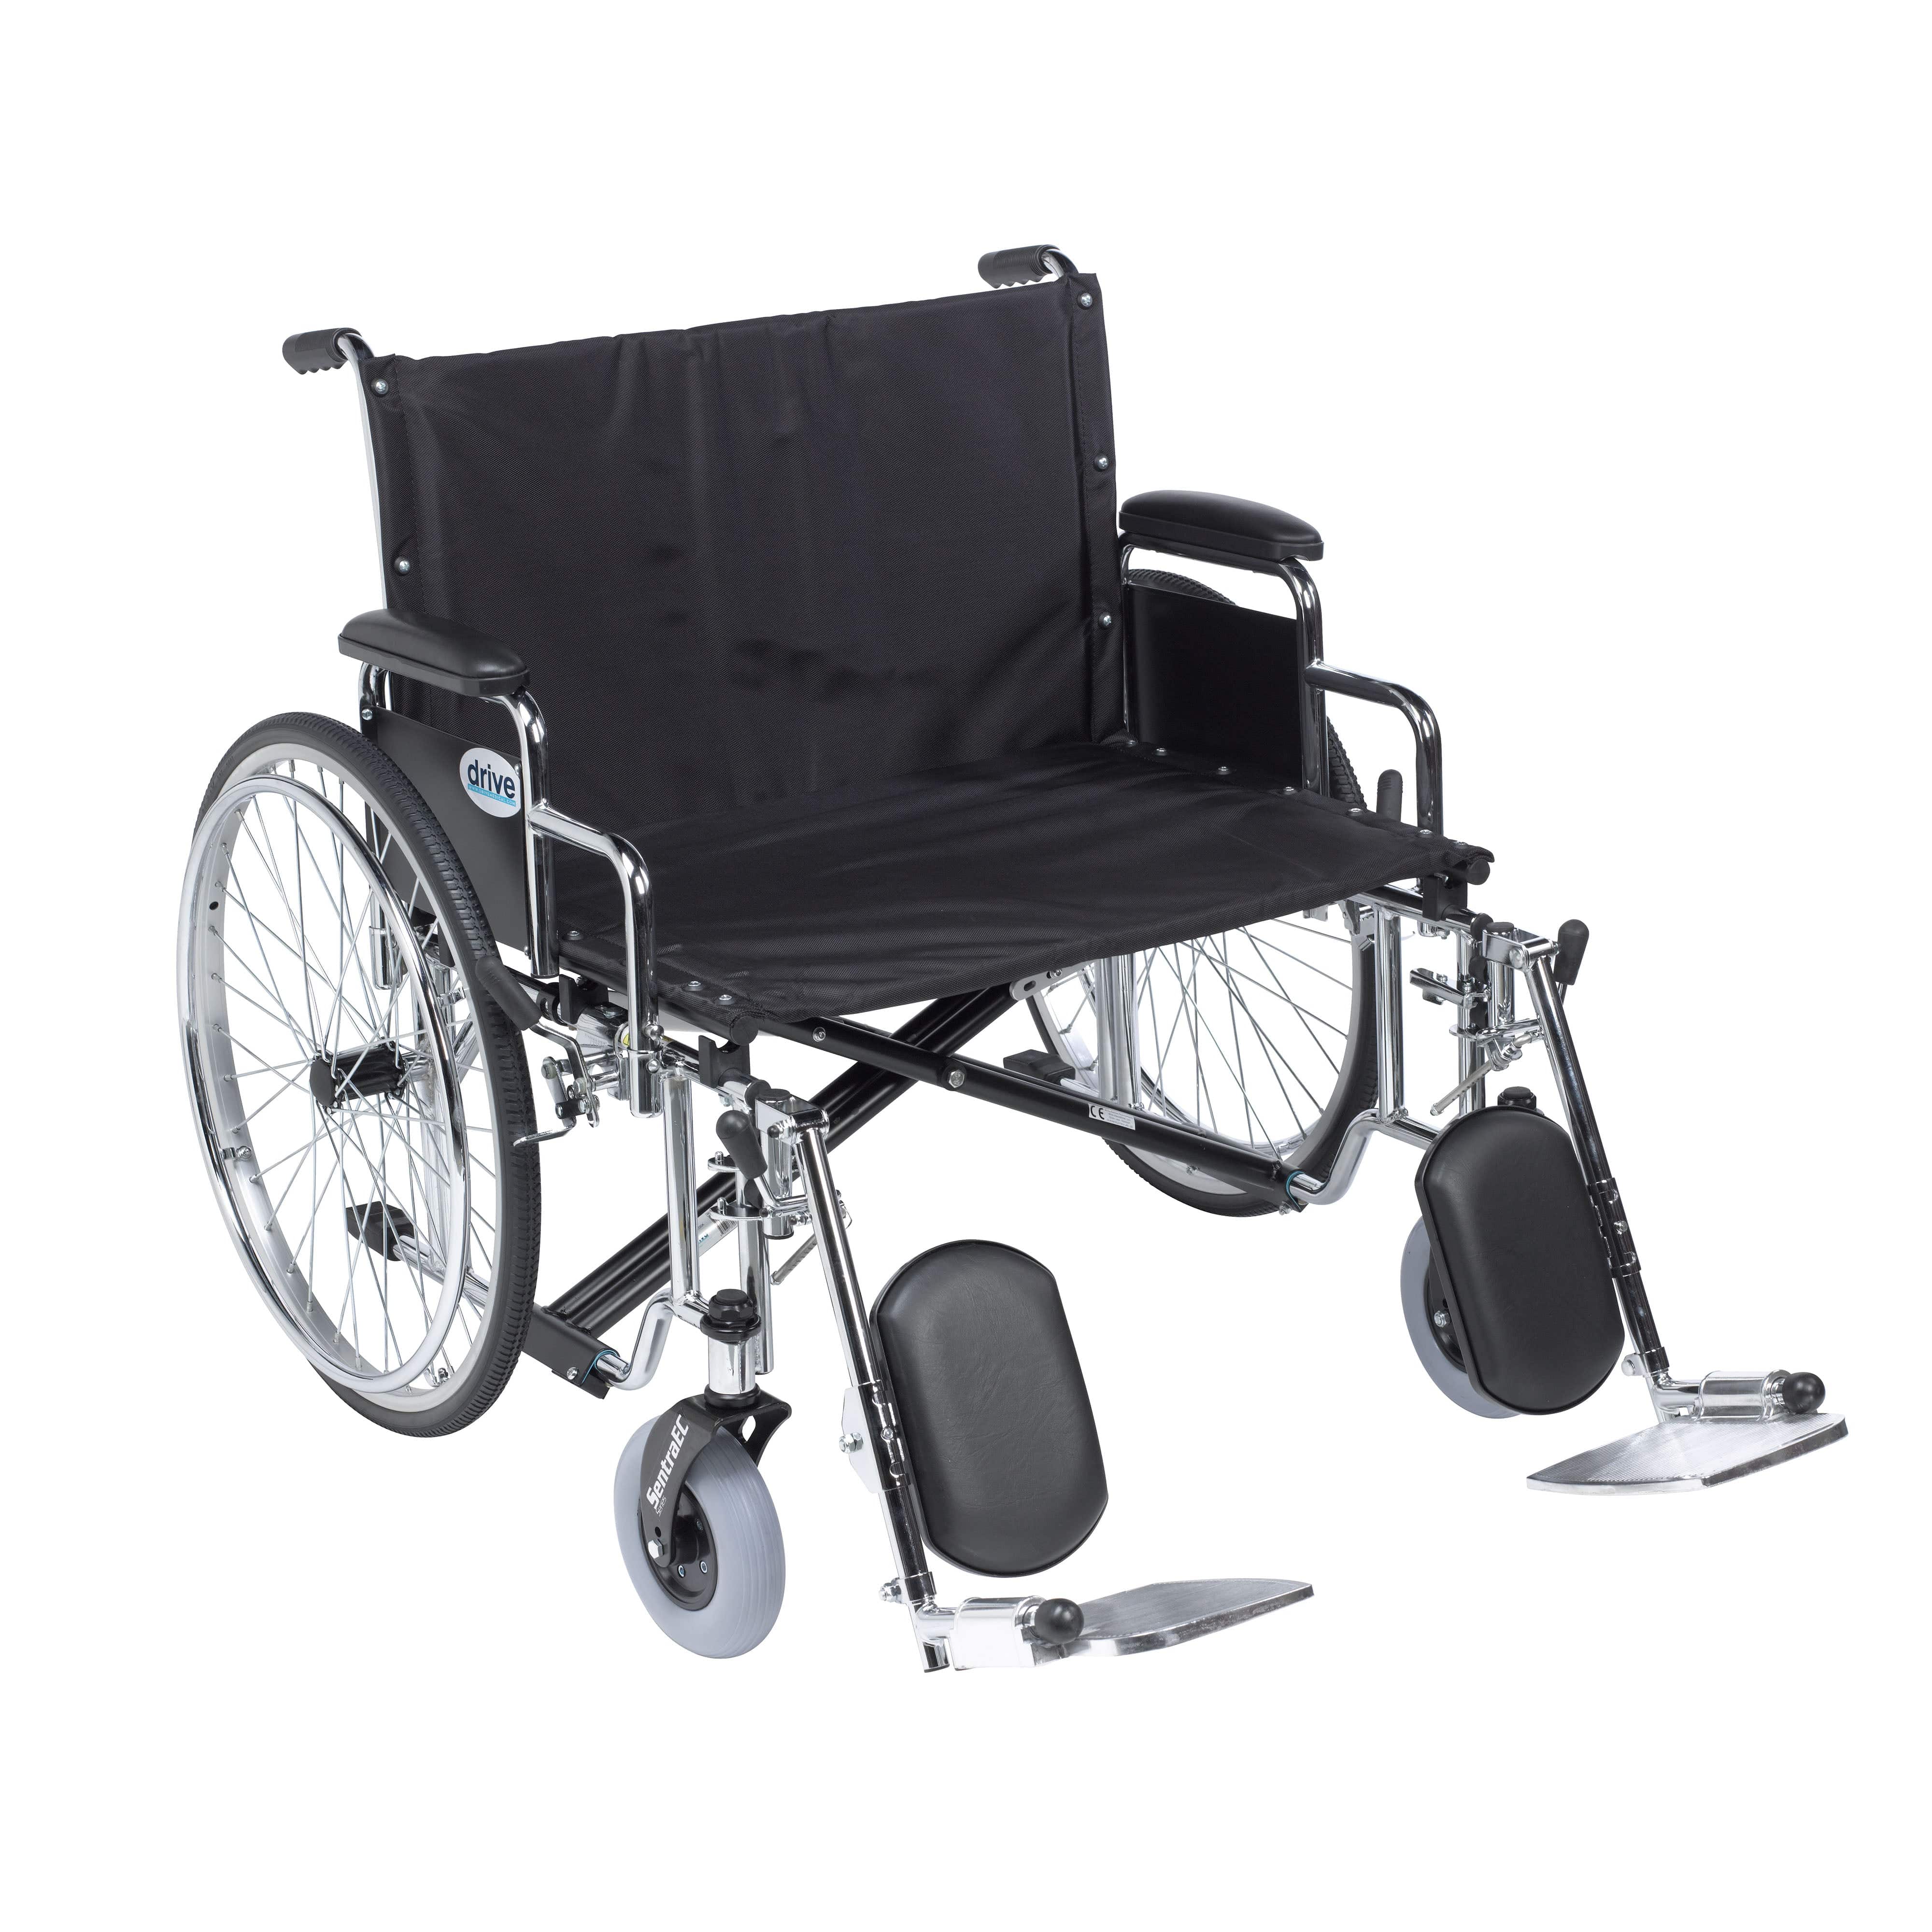 Drive Medical Wheelchairs/Heavy Duty Wheelchairs Detachable Desk Arms and Elevating Leg Rests / 26" Seat Drive Medical Sentra EC Heavy Duty Extra Wide Wheelchair